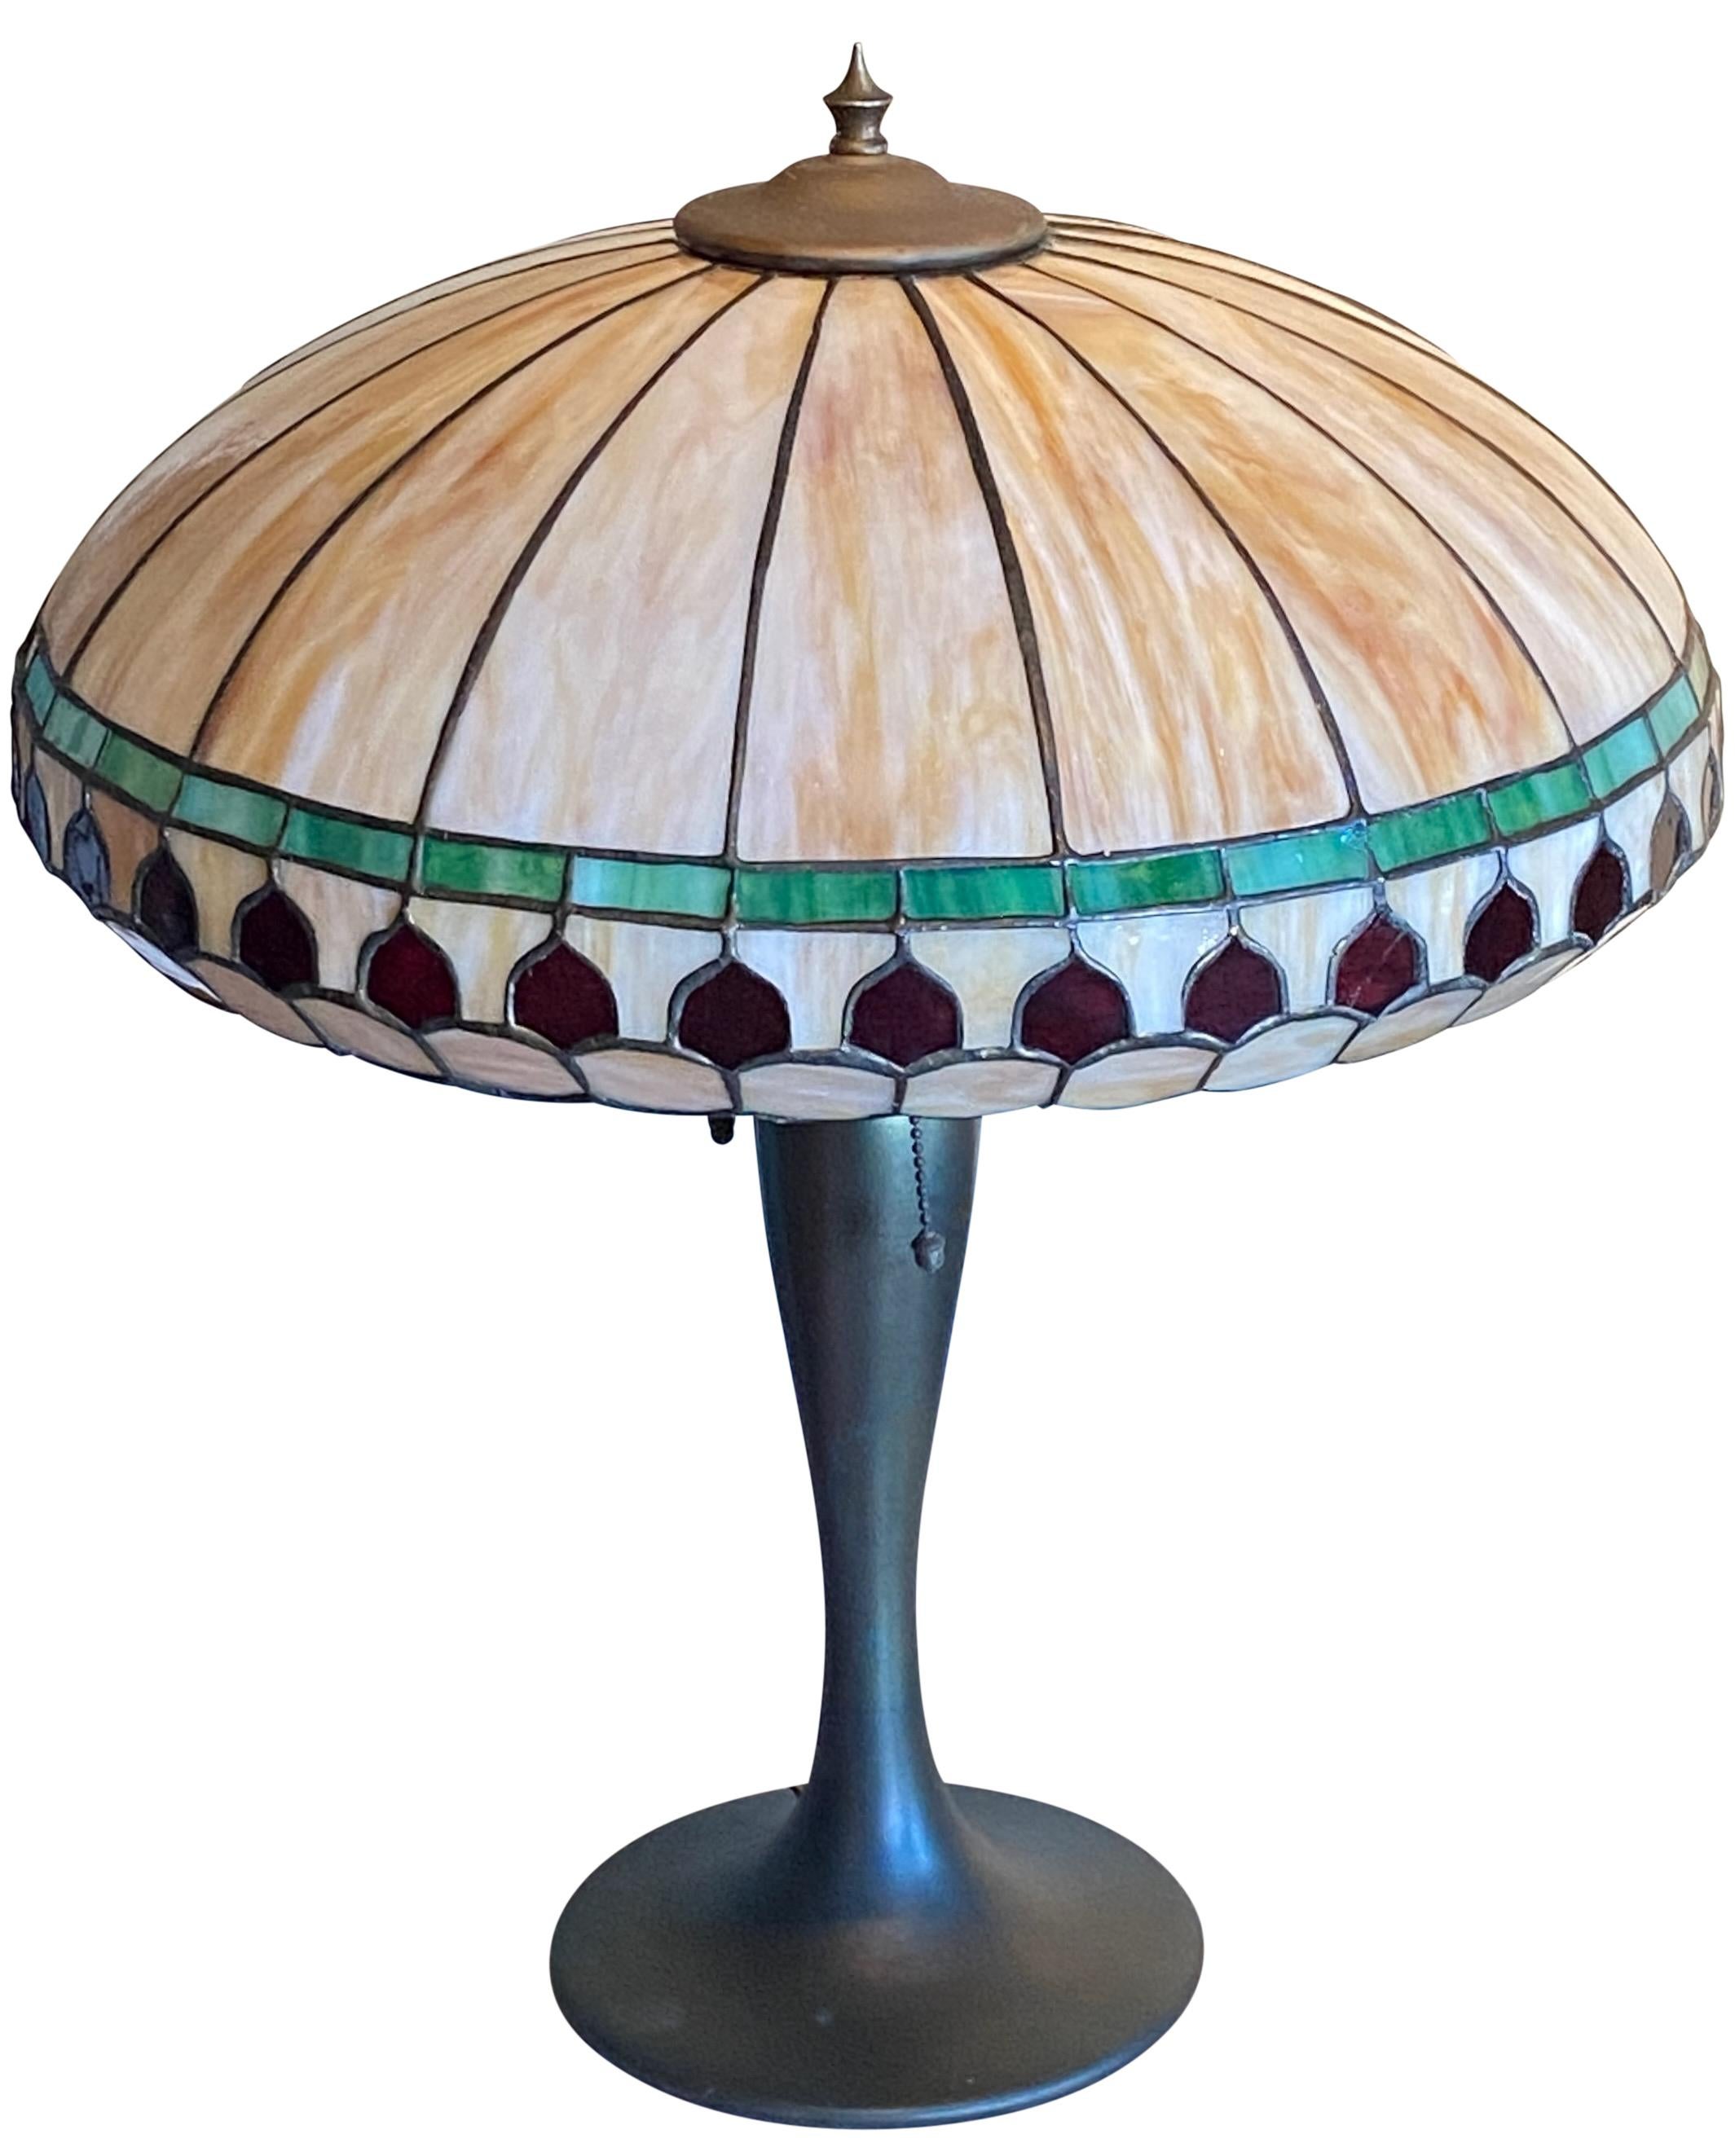 Glass Early 20th Century American Arts and Crafts Era Leaded Table Lamp For Sale